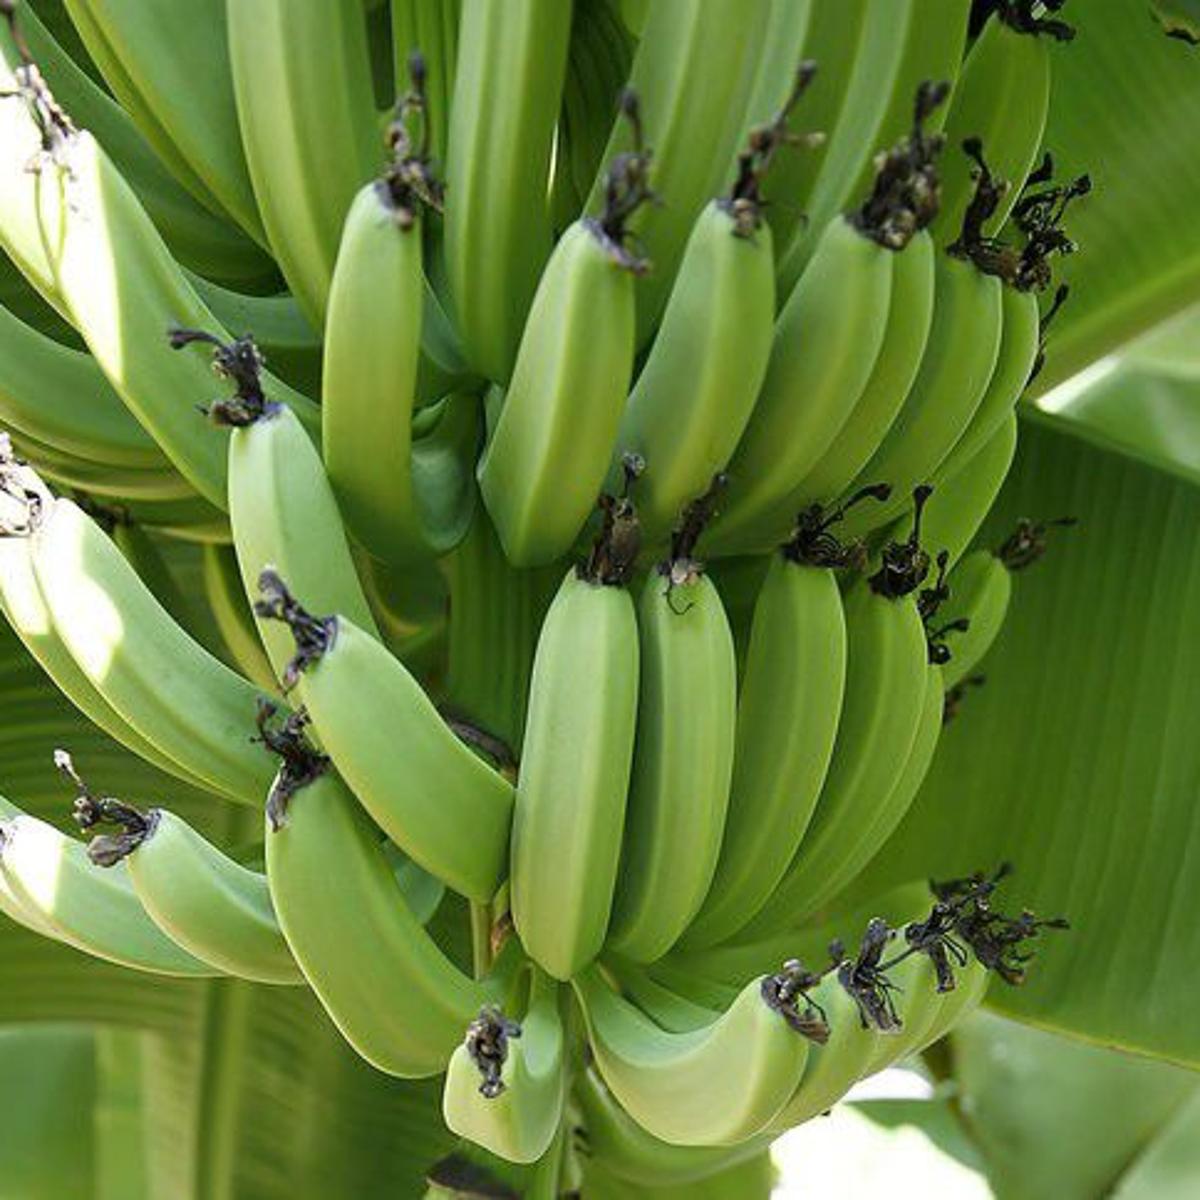 Banana Plants Answers To All Your Questions About Care Pruning And Harvesting Fruit Home Garden Nola Com,Farmhouse Country Kitchen Designs With Islands